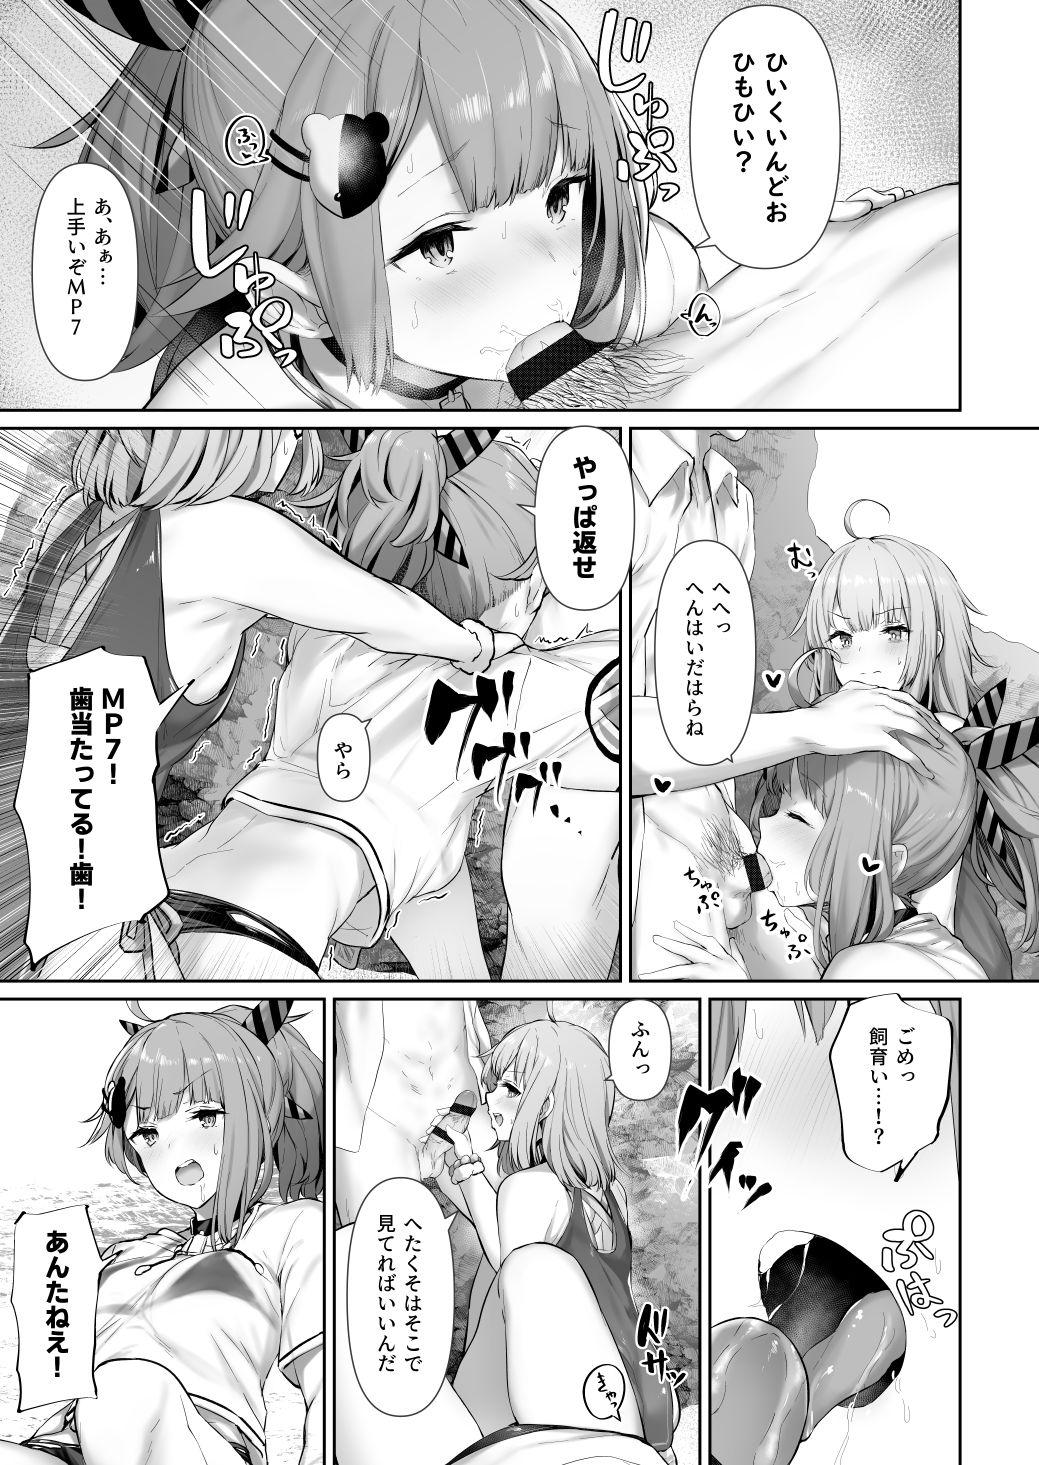 Sex Toys MP7 and AA-12 - Girls frontline Pee - Page 3